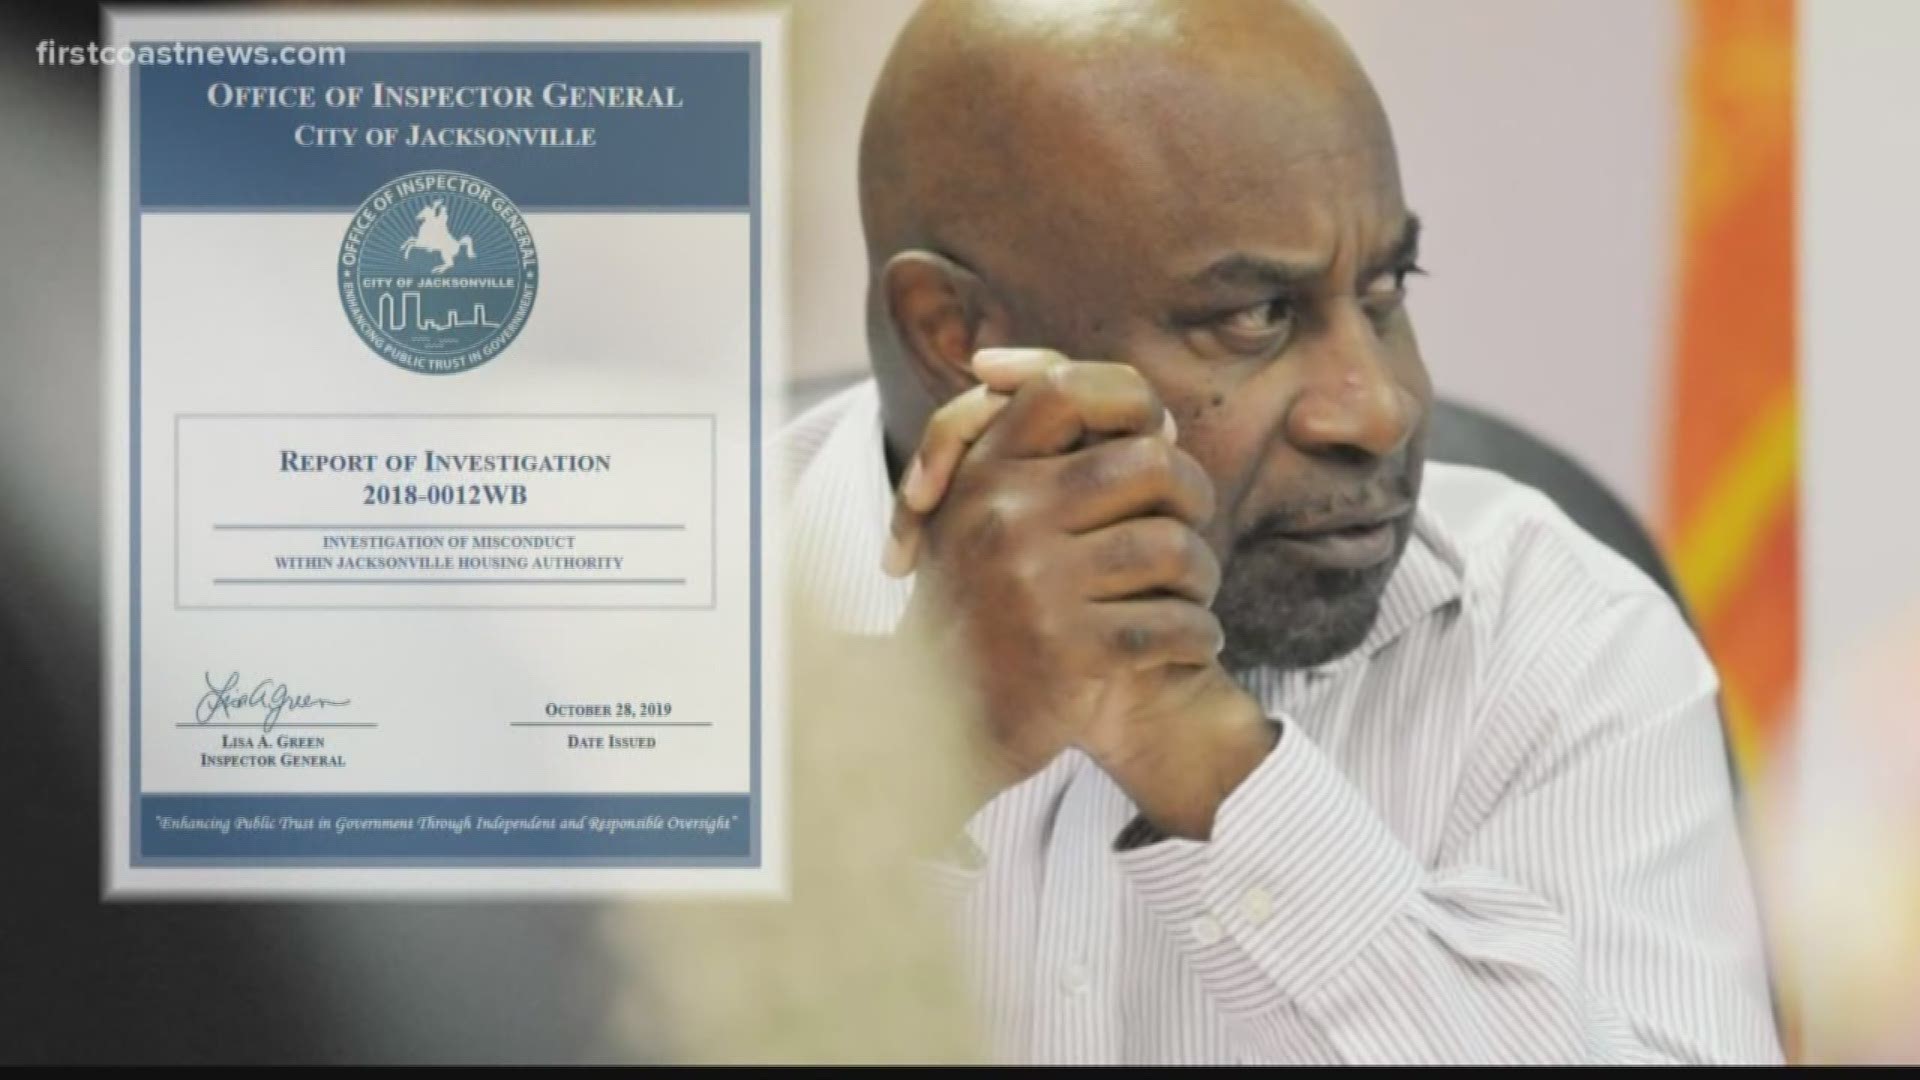 A report from Jacksonville's inspector general substantiates claims that Jacksonville Housing Authority CEO/President Frederick McKinnies had sex with employees.